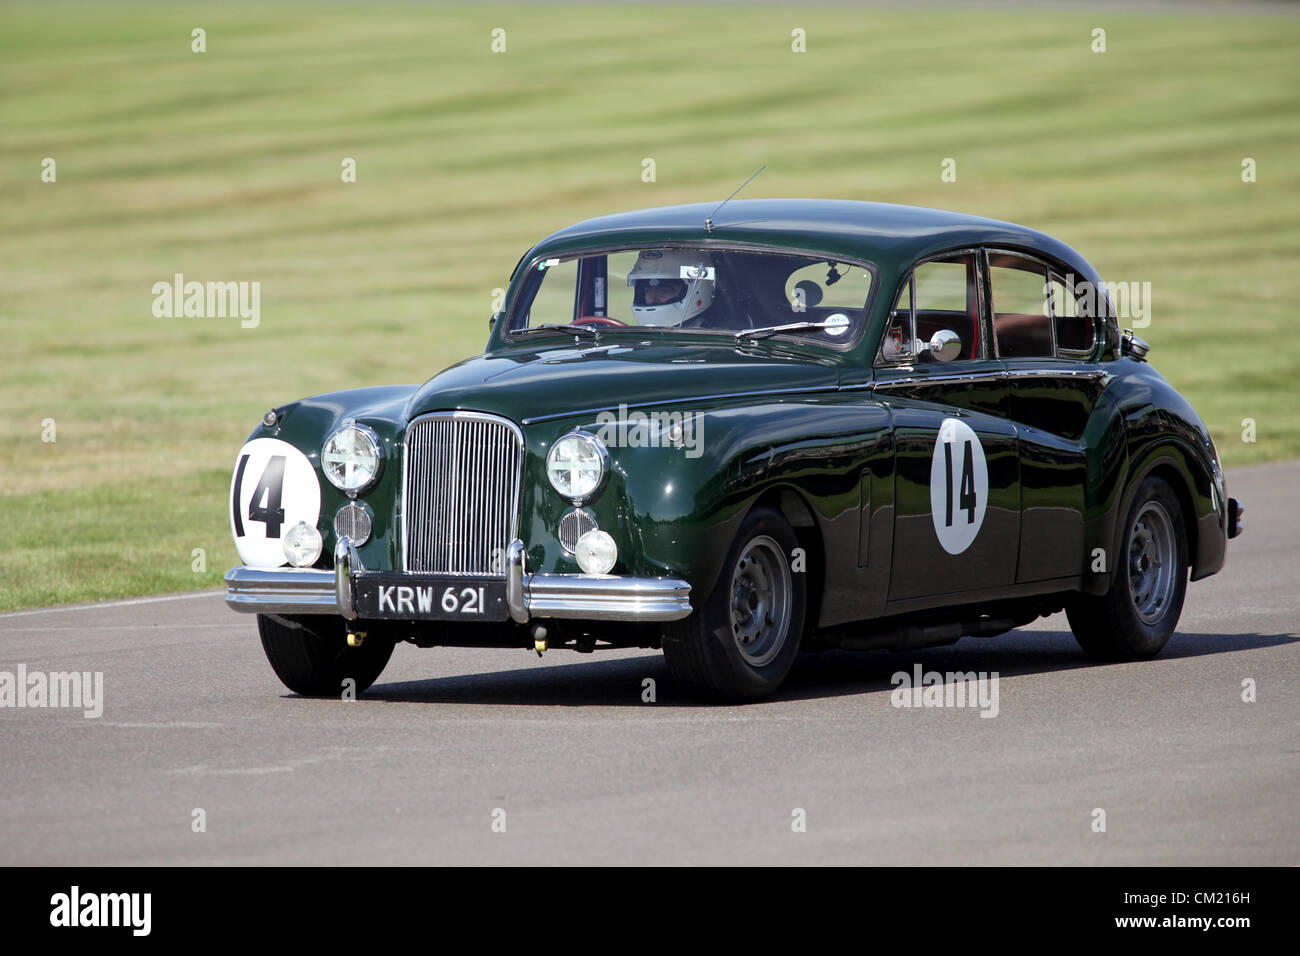 Goodwood Estate, Chichester, UK. 15th September 2012. Rowan Atkinson driving a Jaguar MkV11 during the St Mary's Trophy at the Goodwood Revival. The revival is a 'magical step back in time', showcasing a mixture of cars and aviation from the 40's, 50's and 60's and is one of the most popular historical motor racing events in the world. For more information visit www.goodwood.co.uk/revival. Stock Photo